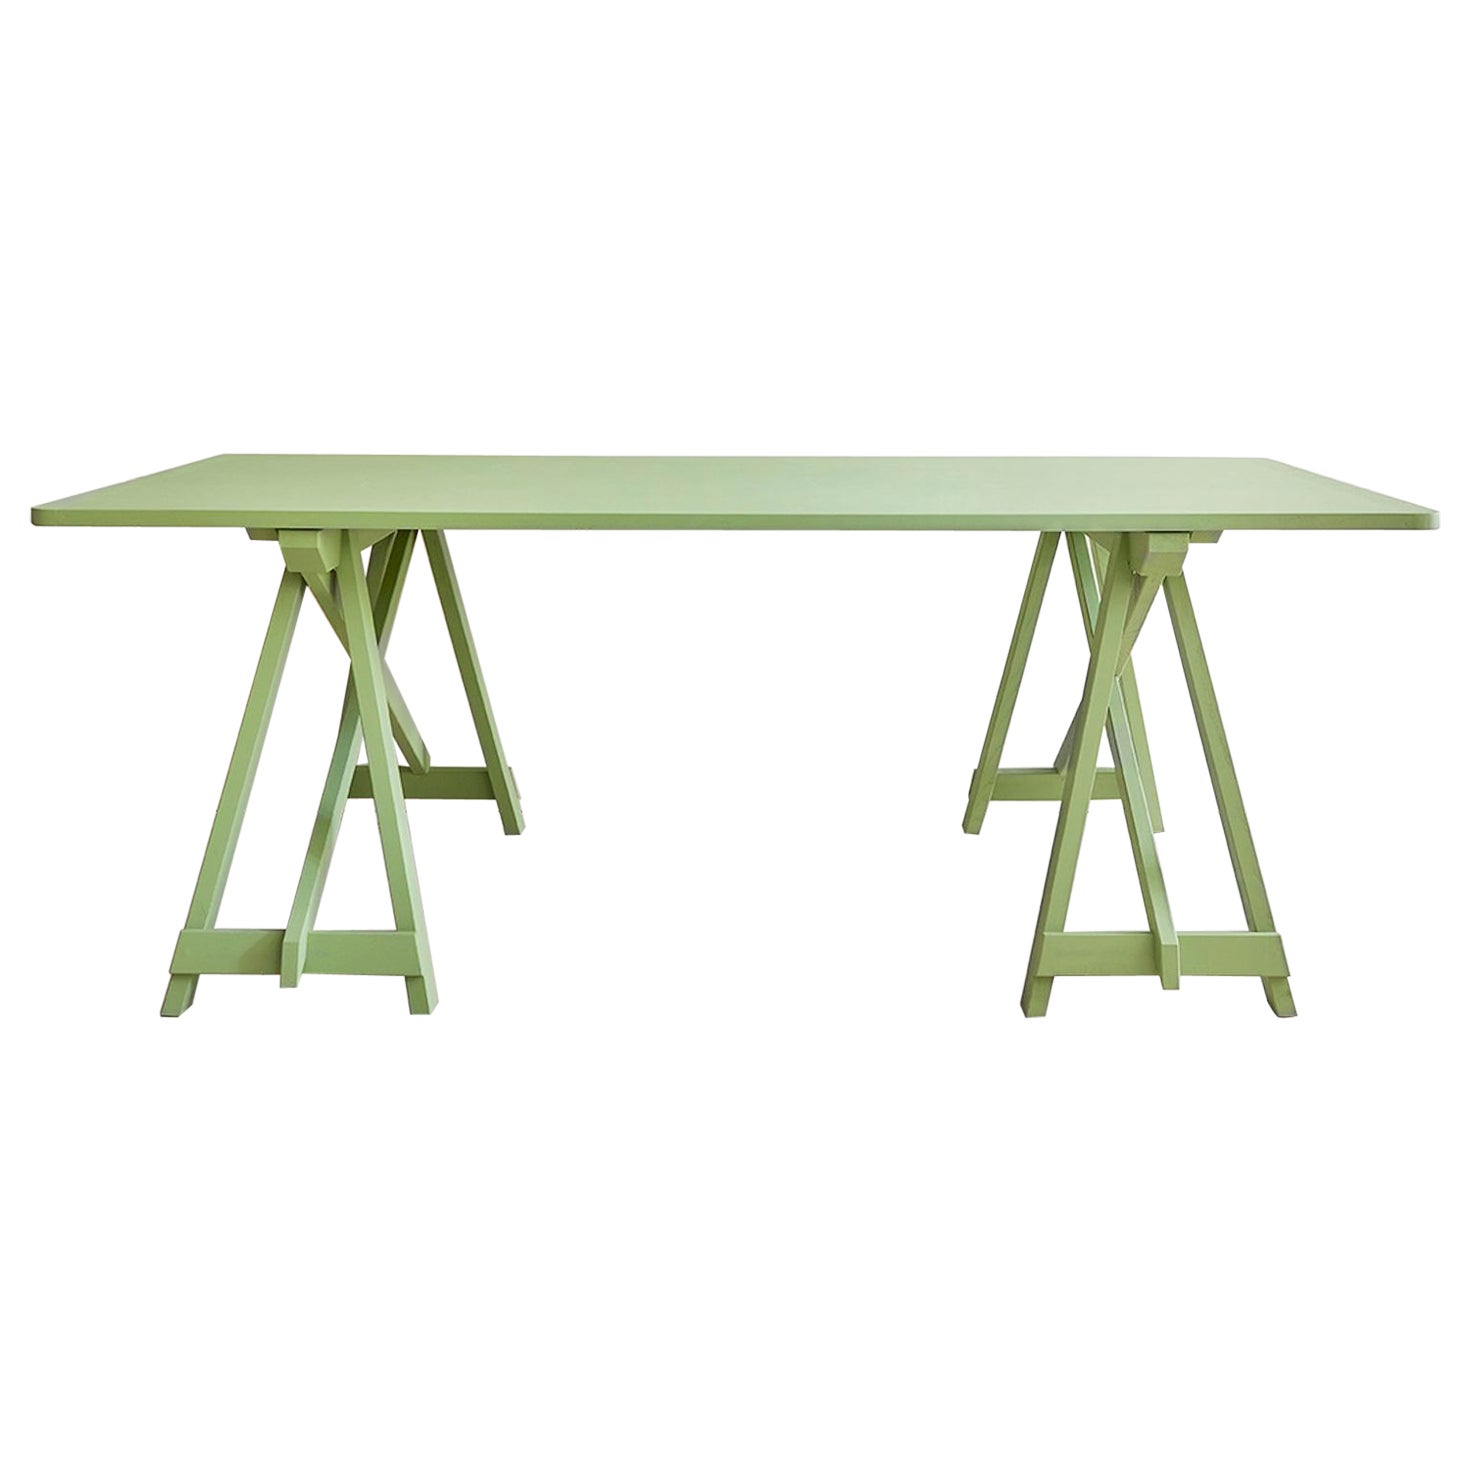 Contemporary Trestle Table in Green Painted Wood, Belgium